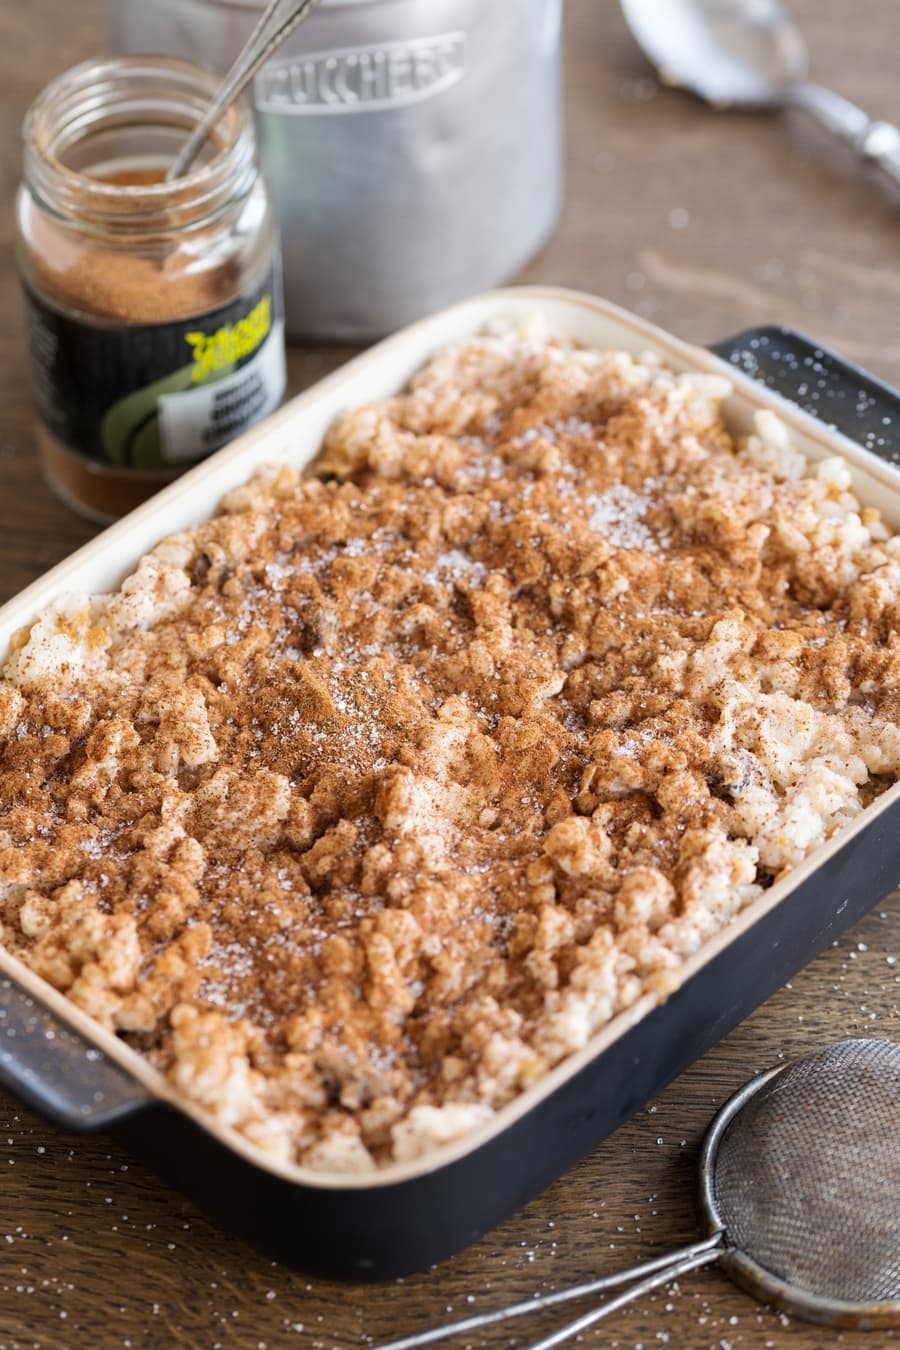 Sweet rice casserole sprinkled with ground cinnamon and sugar.